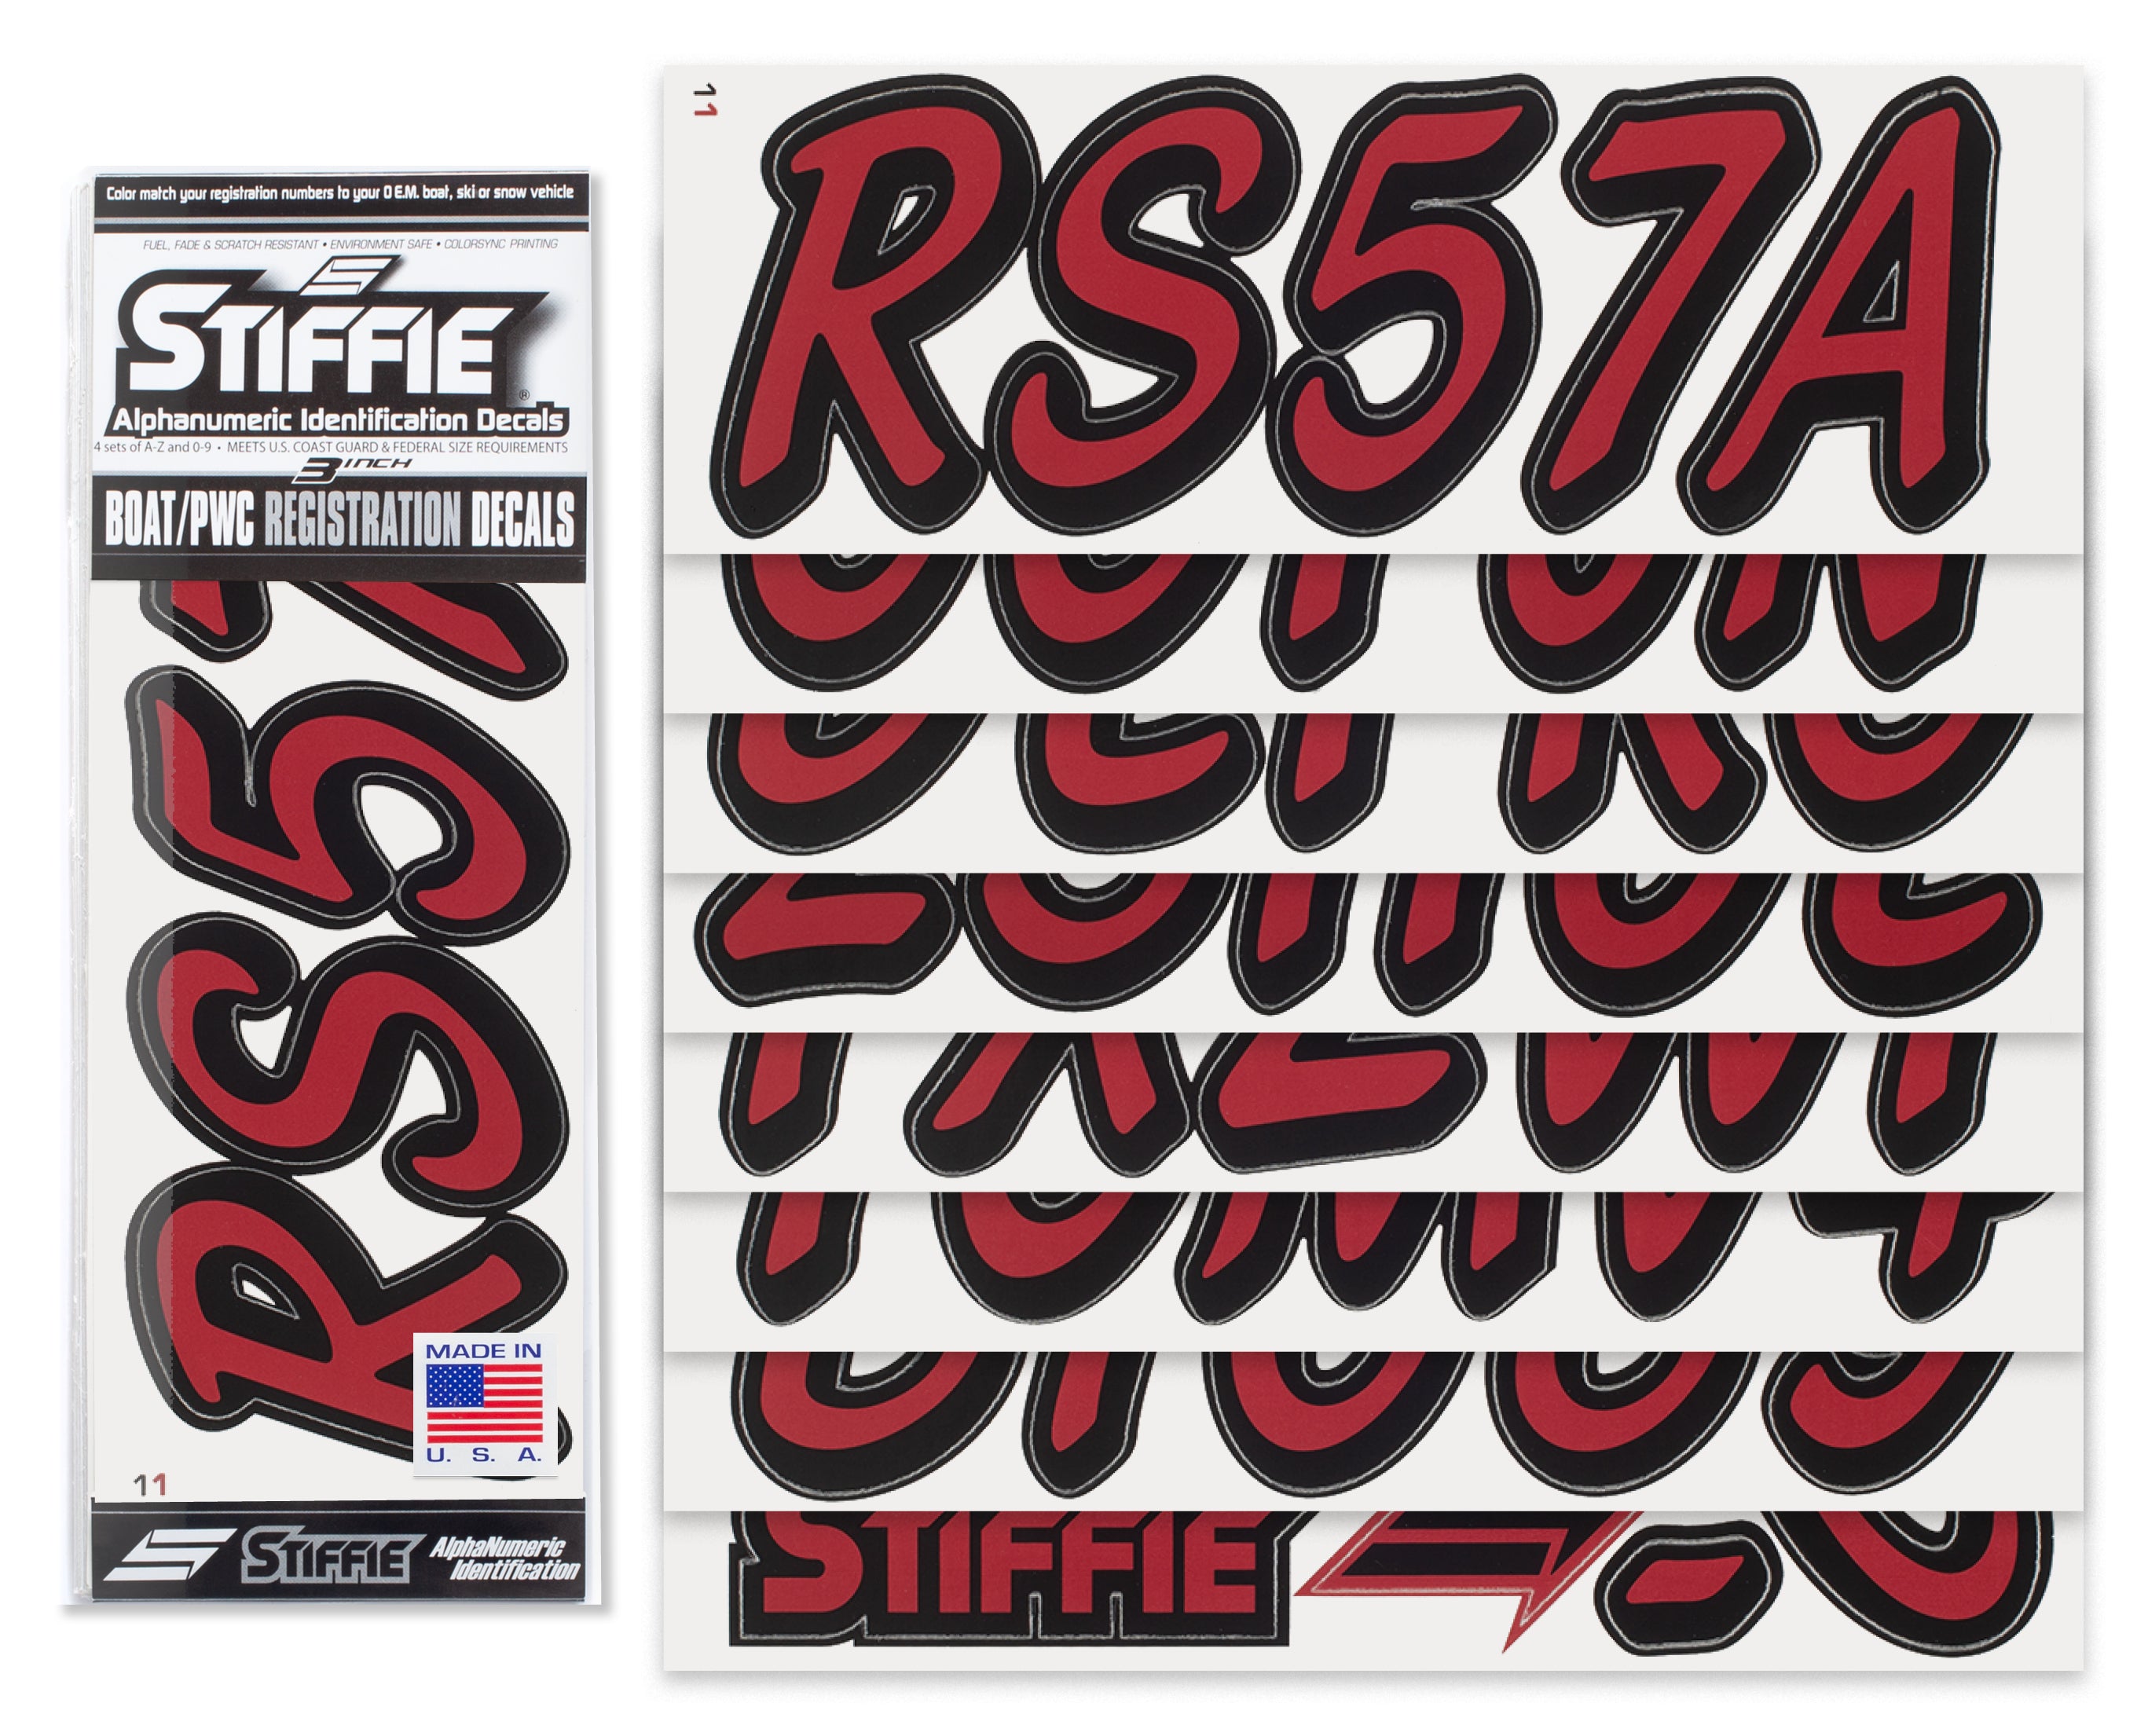 STIFFIE Whipline Solid Burgundy/Black 3" Alpha-Numeric Registration Identification Numbers Stickers Decals for Boats & Personal Watercraft